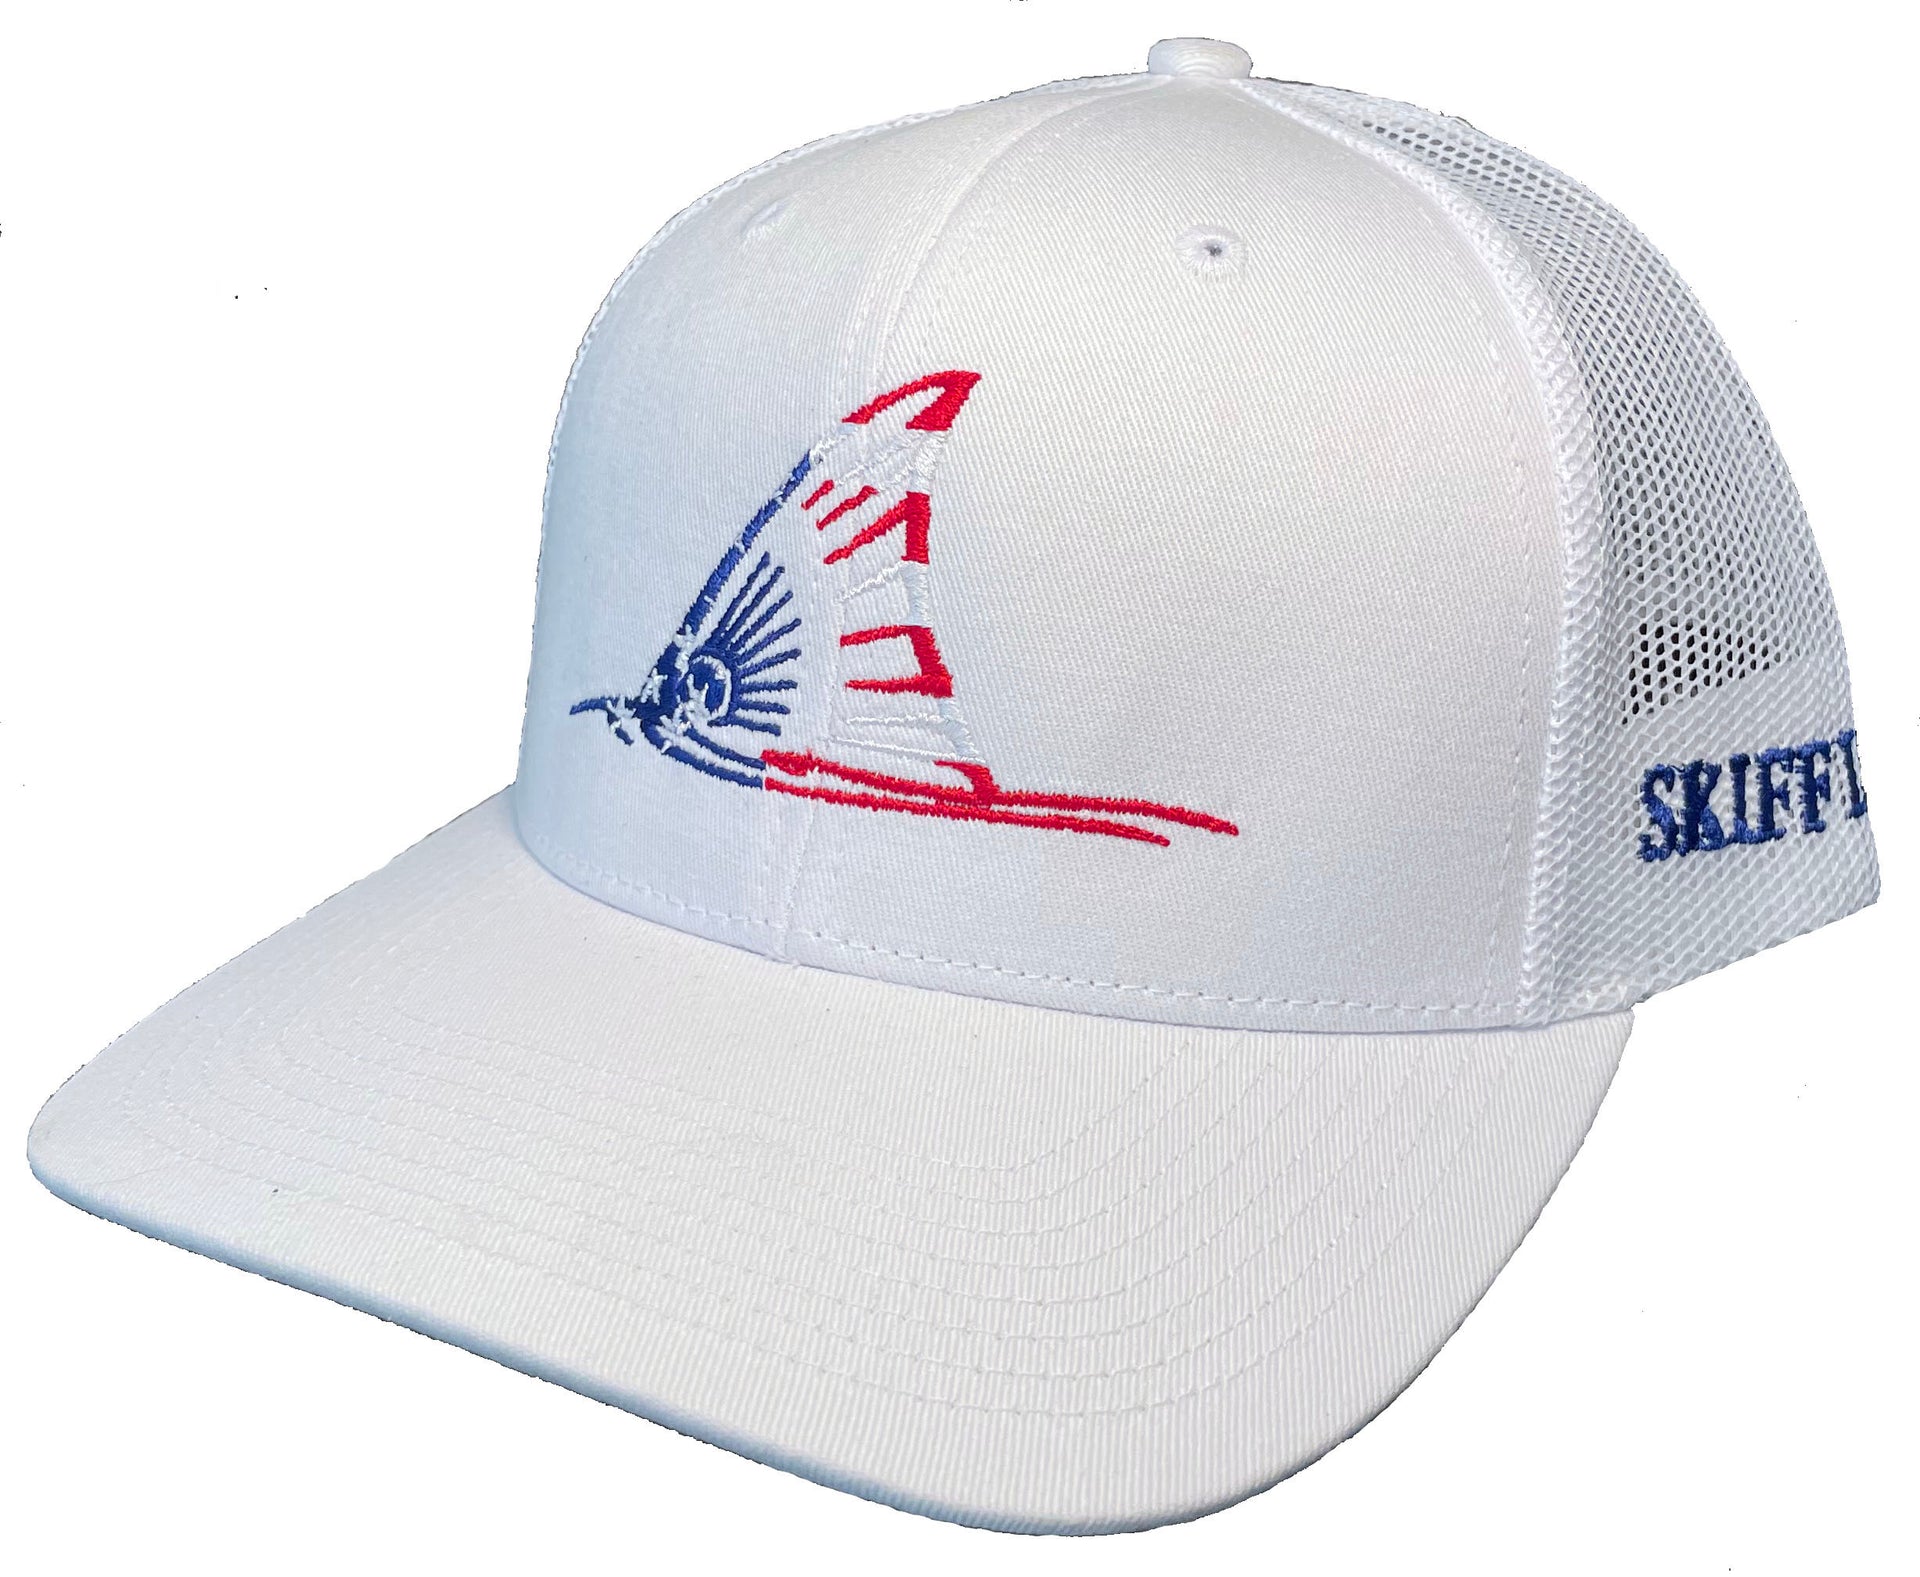 Red, White and Blue Redfish Tail on White and White Meshback Trucker Hats  by Skiff Life